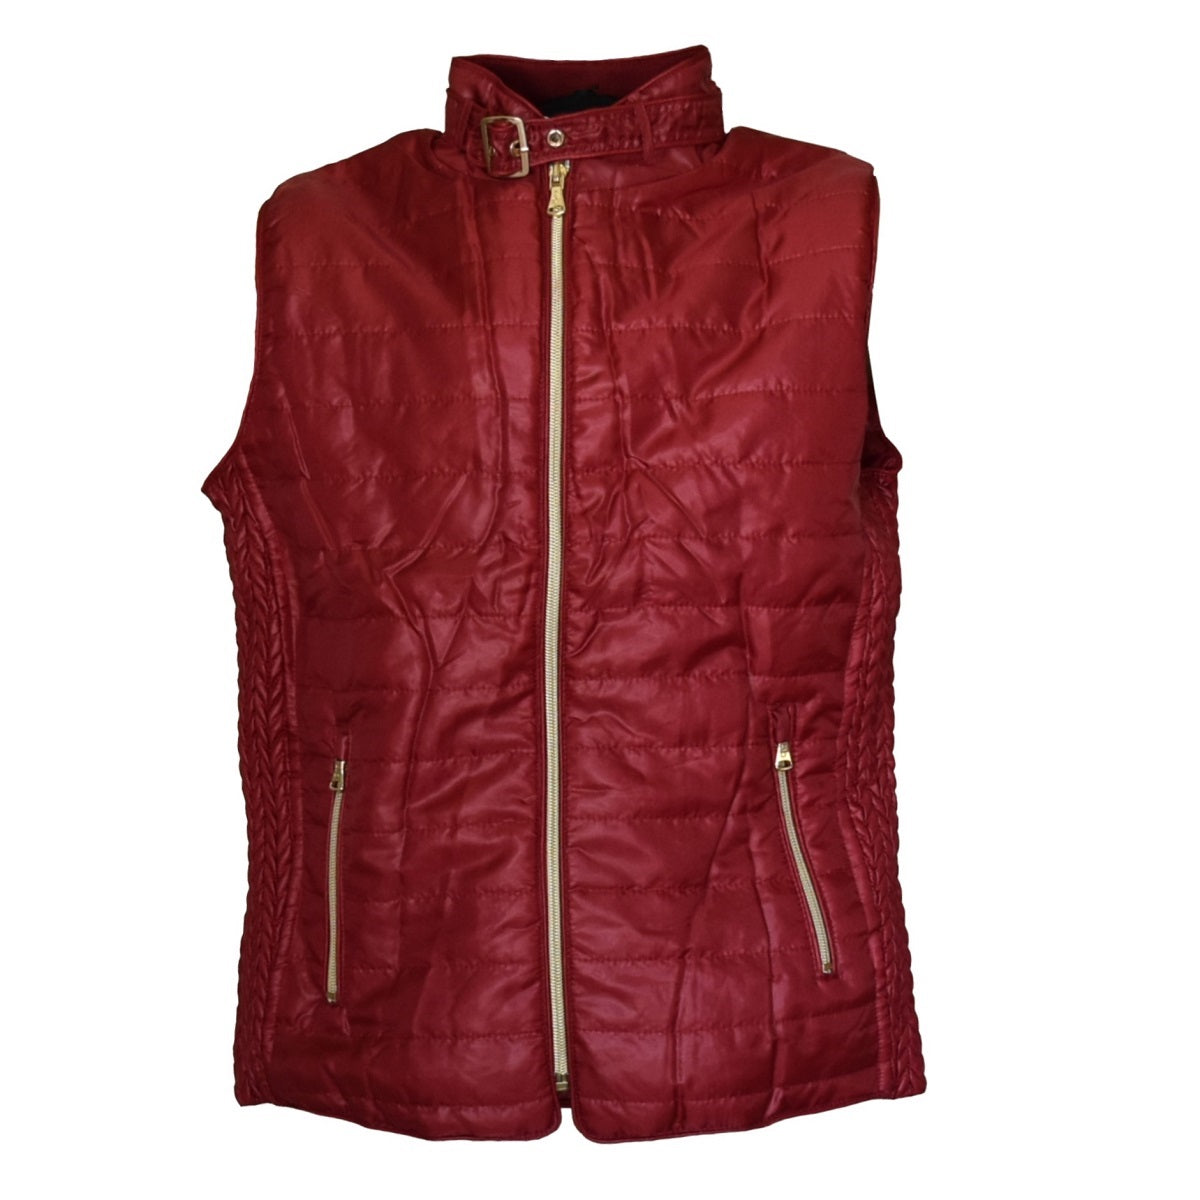 Chaleco para Mujer - TM-VH-184 Vest for Women